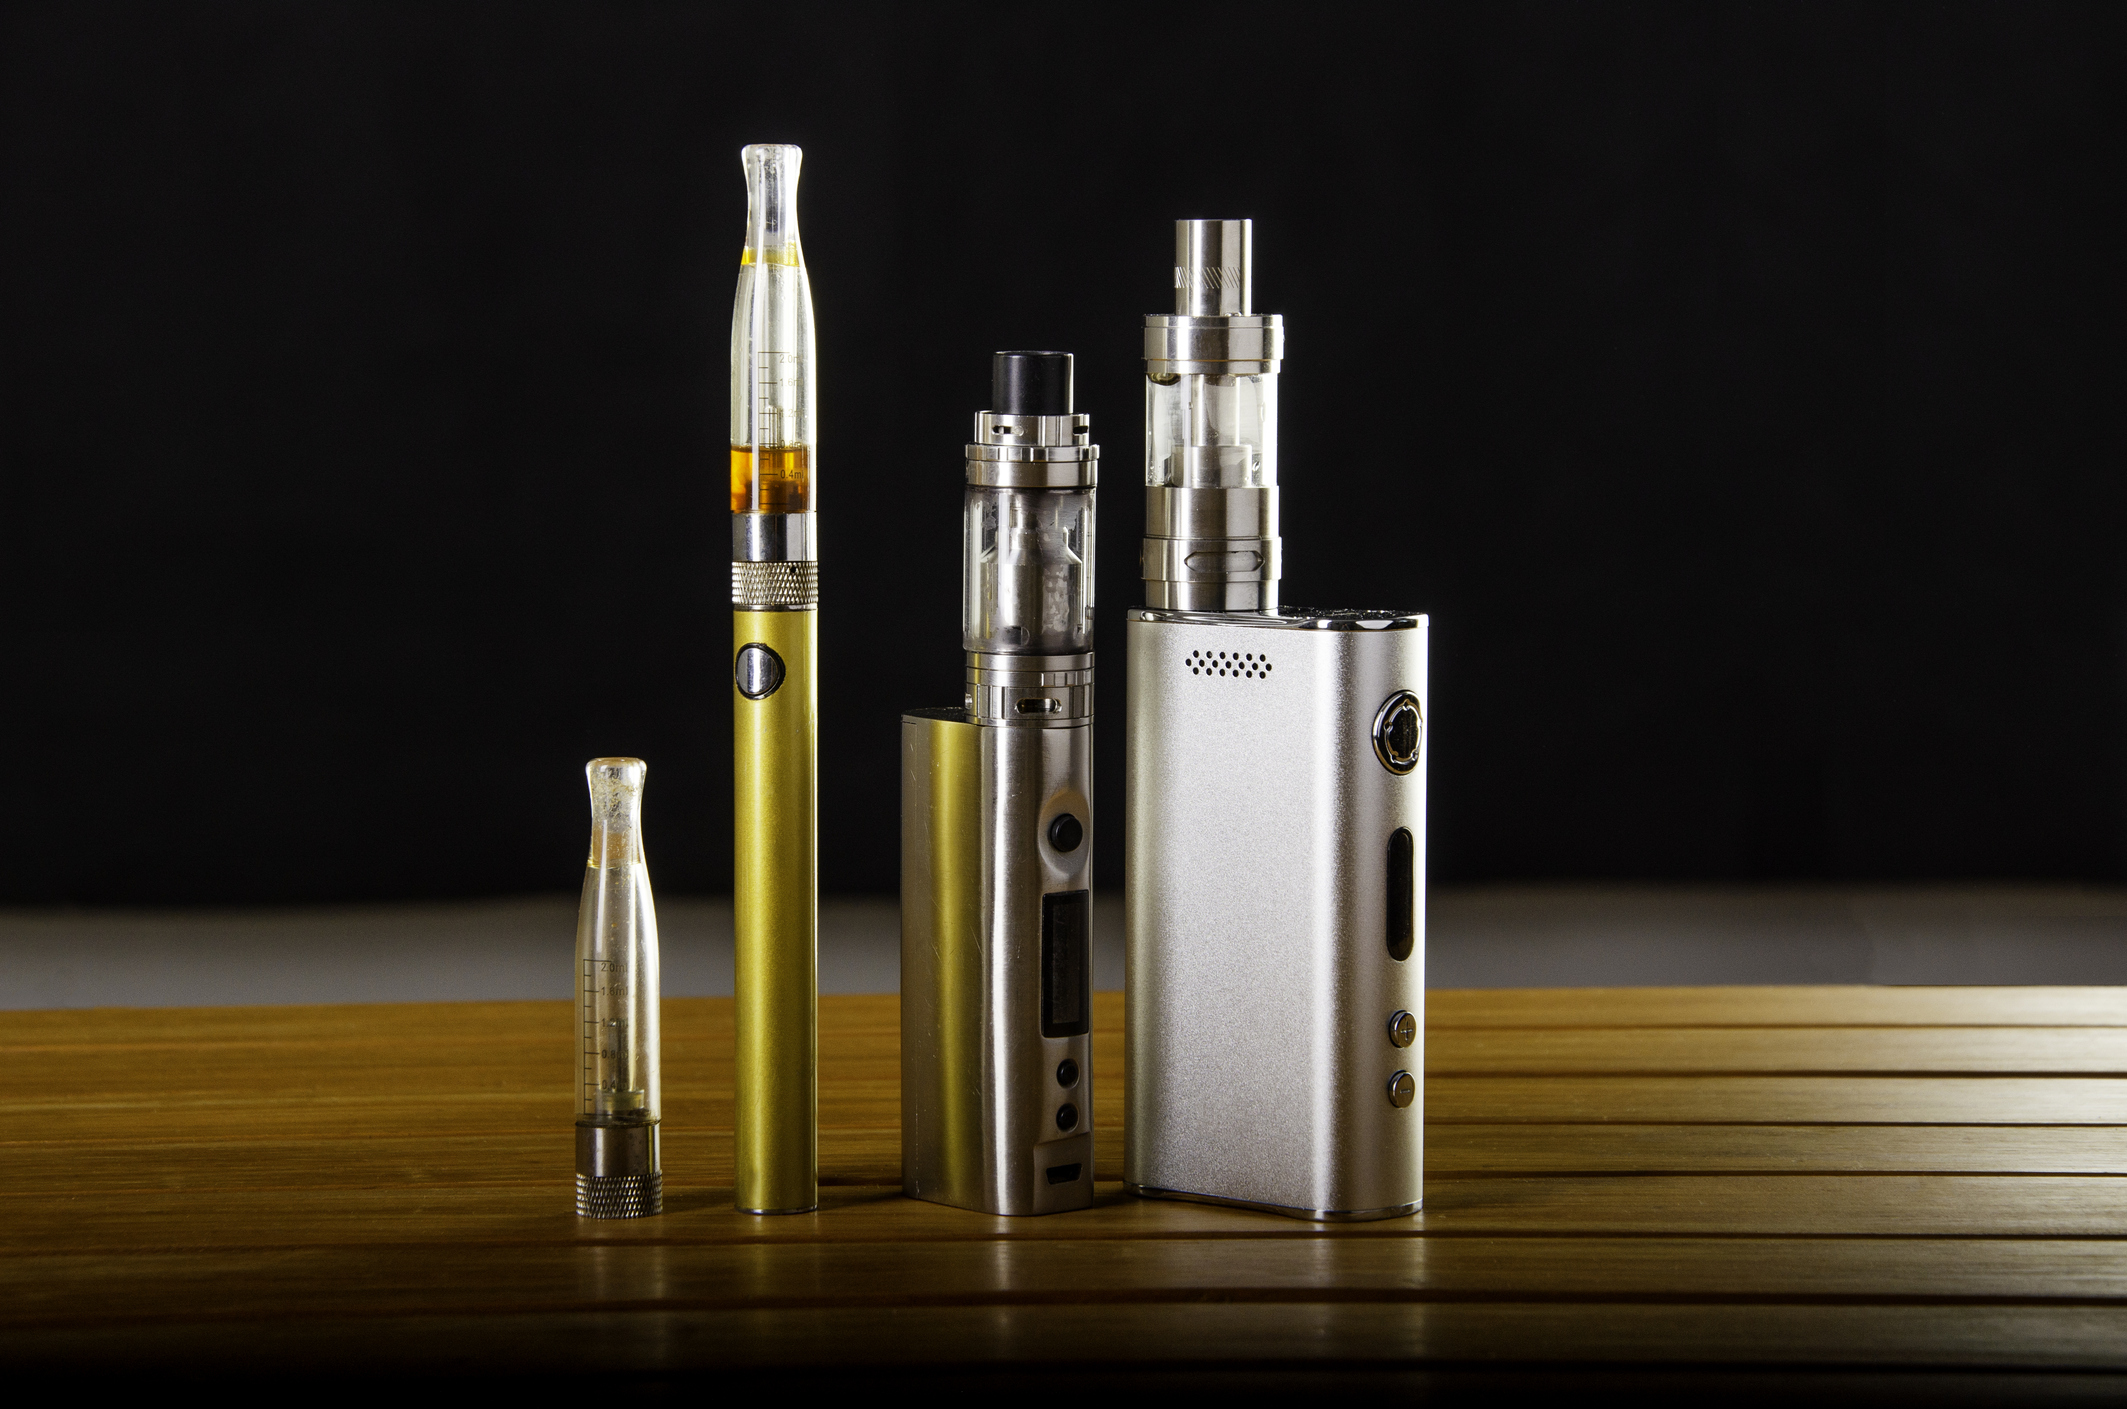 Vaping and E-Cigs: A New Addiction for a New Generation